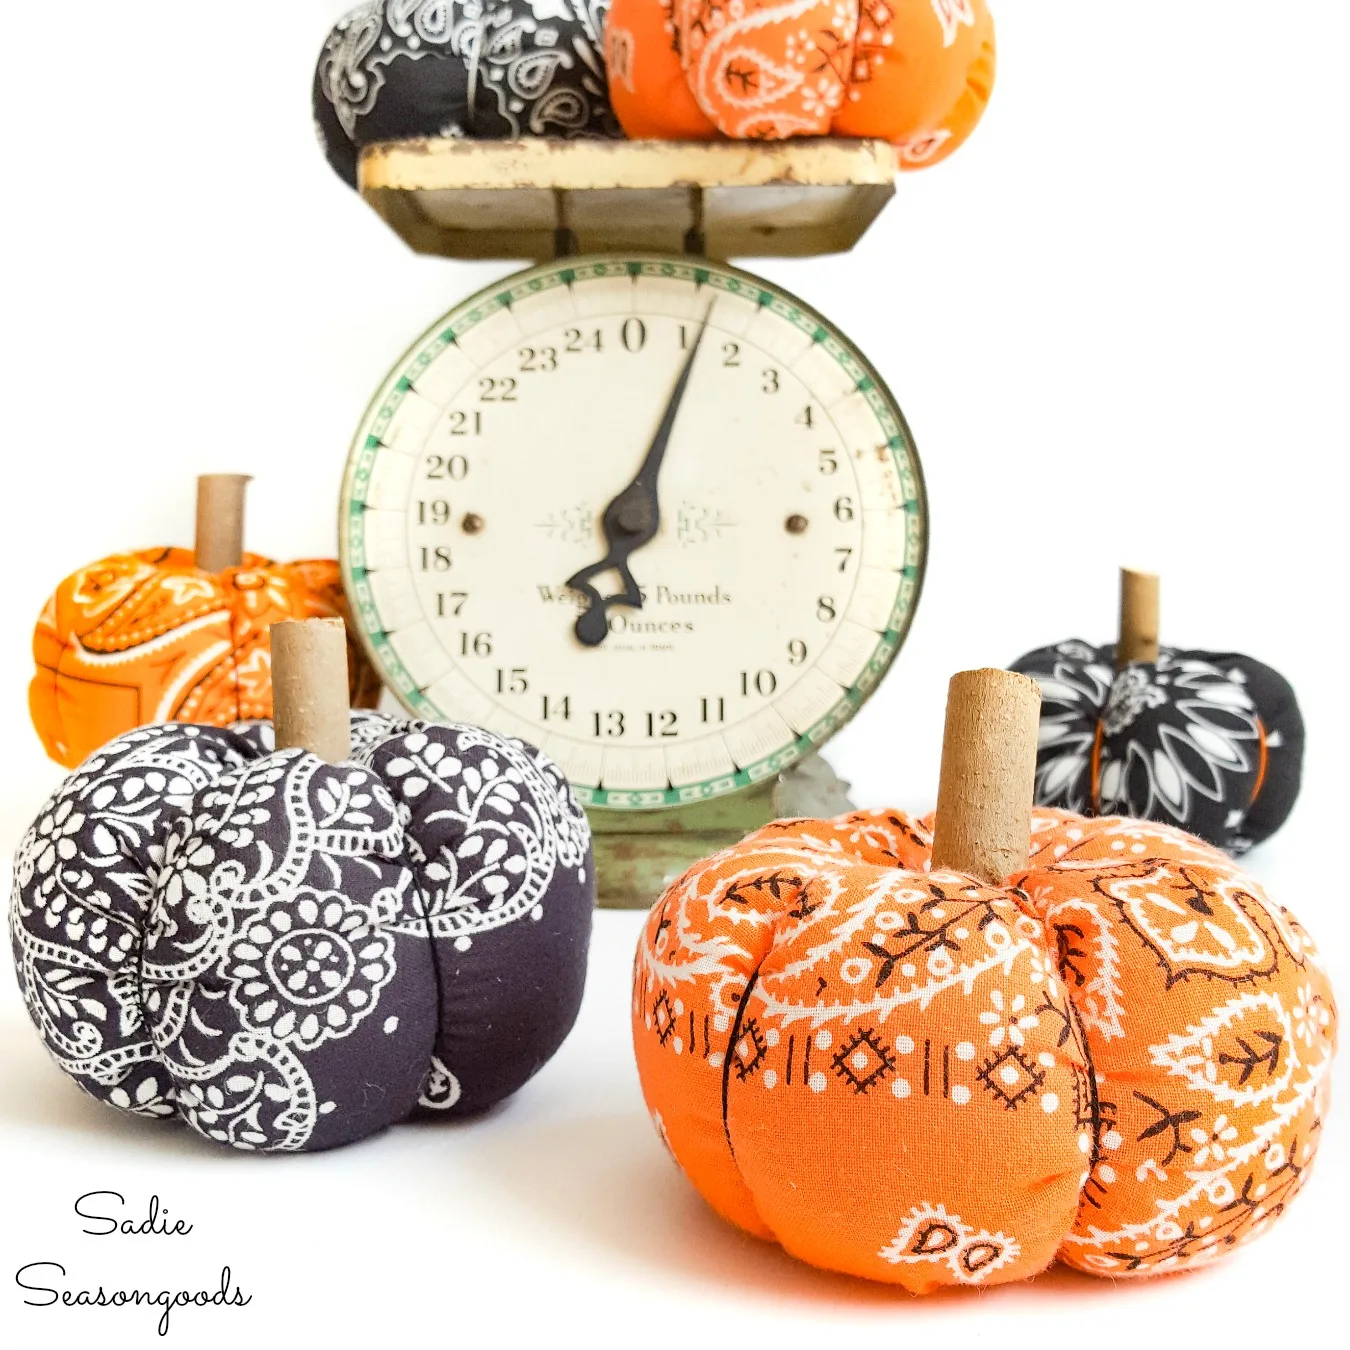 Fall Crafts for Adults: 40+ Fun and Easy Ideas! - Mod Podge Rocks